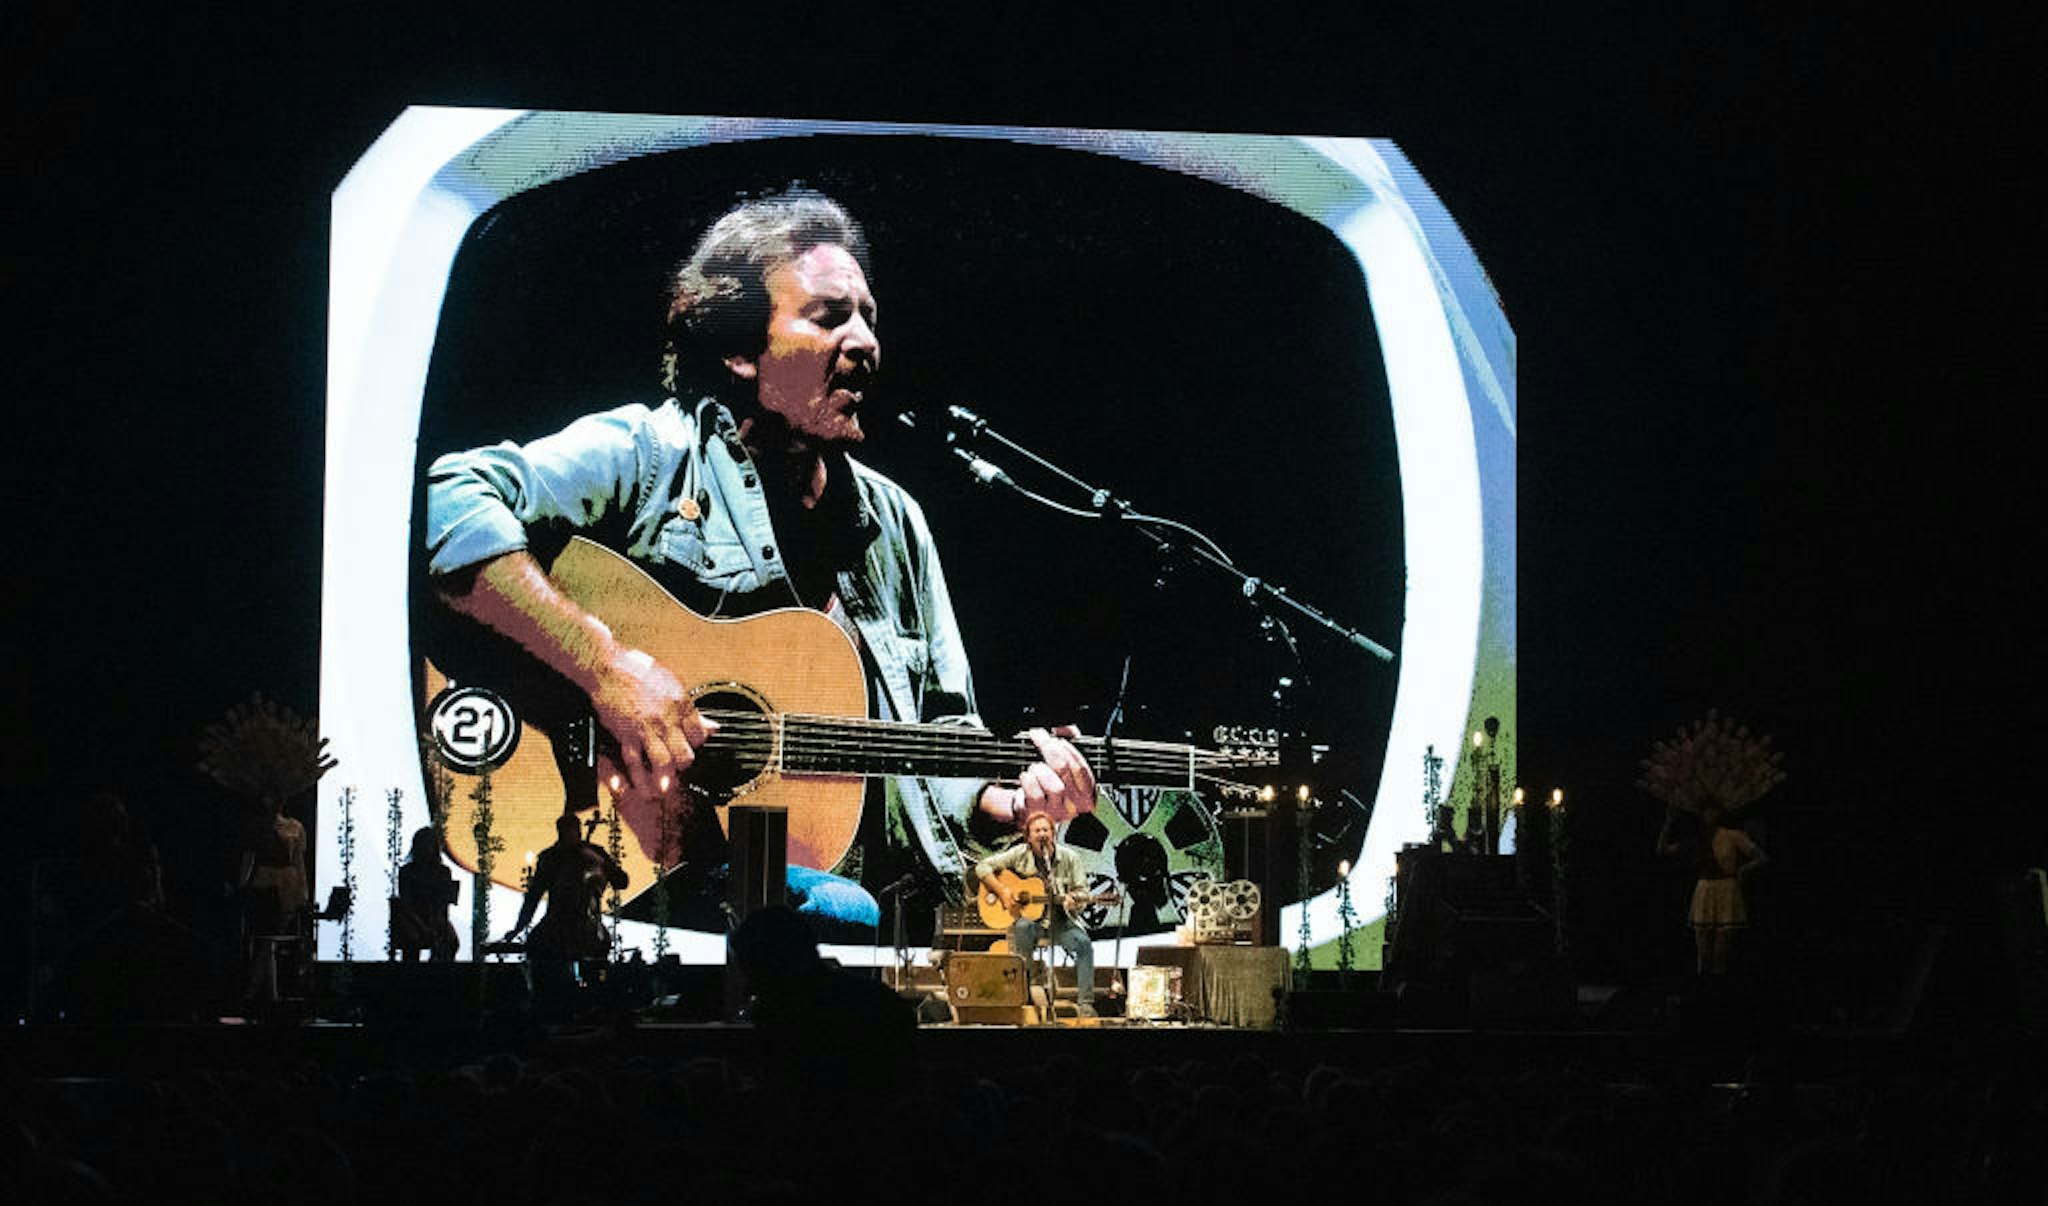 Singer-songwriter and guitarist Eddie Vedder performs live on stage at Max-Schmeling-Halle on June 28, 2019 in Berlin, Germany. (Photo by Jim Bennett/Getty Images)